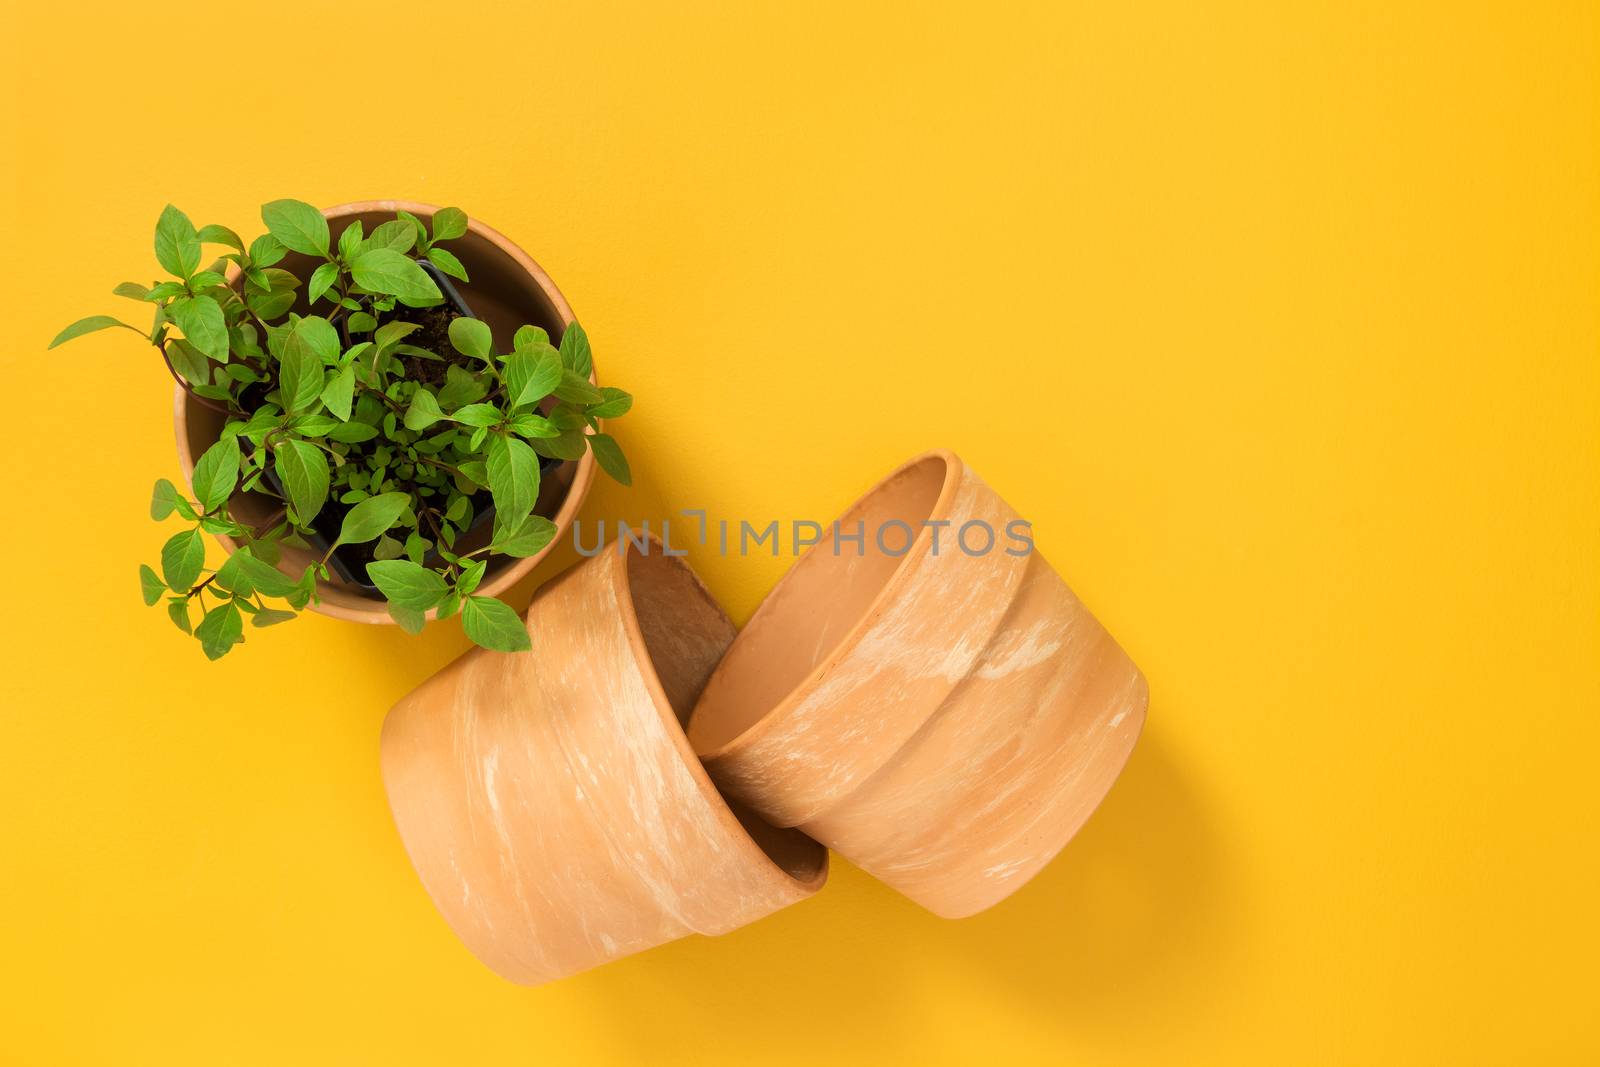 Basil plant growing in a pot. Kitchen herbs and clay pots on yellow background.